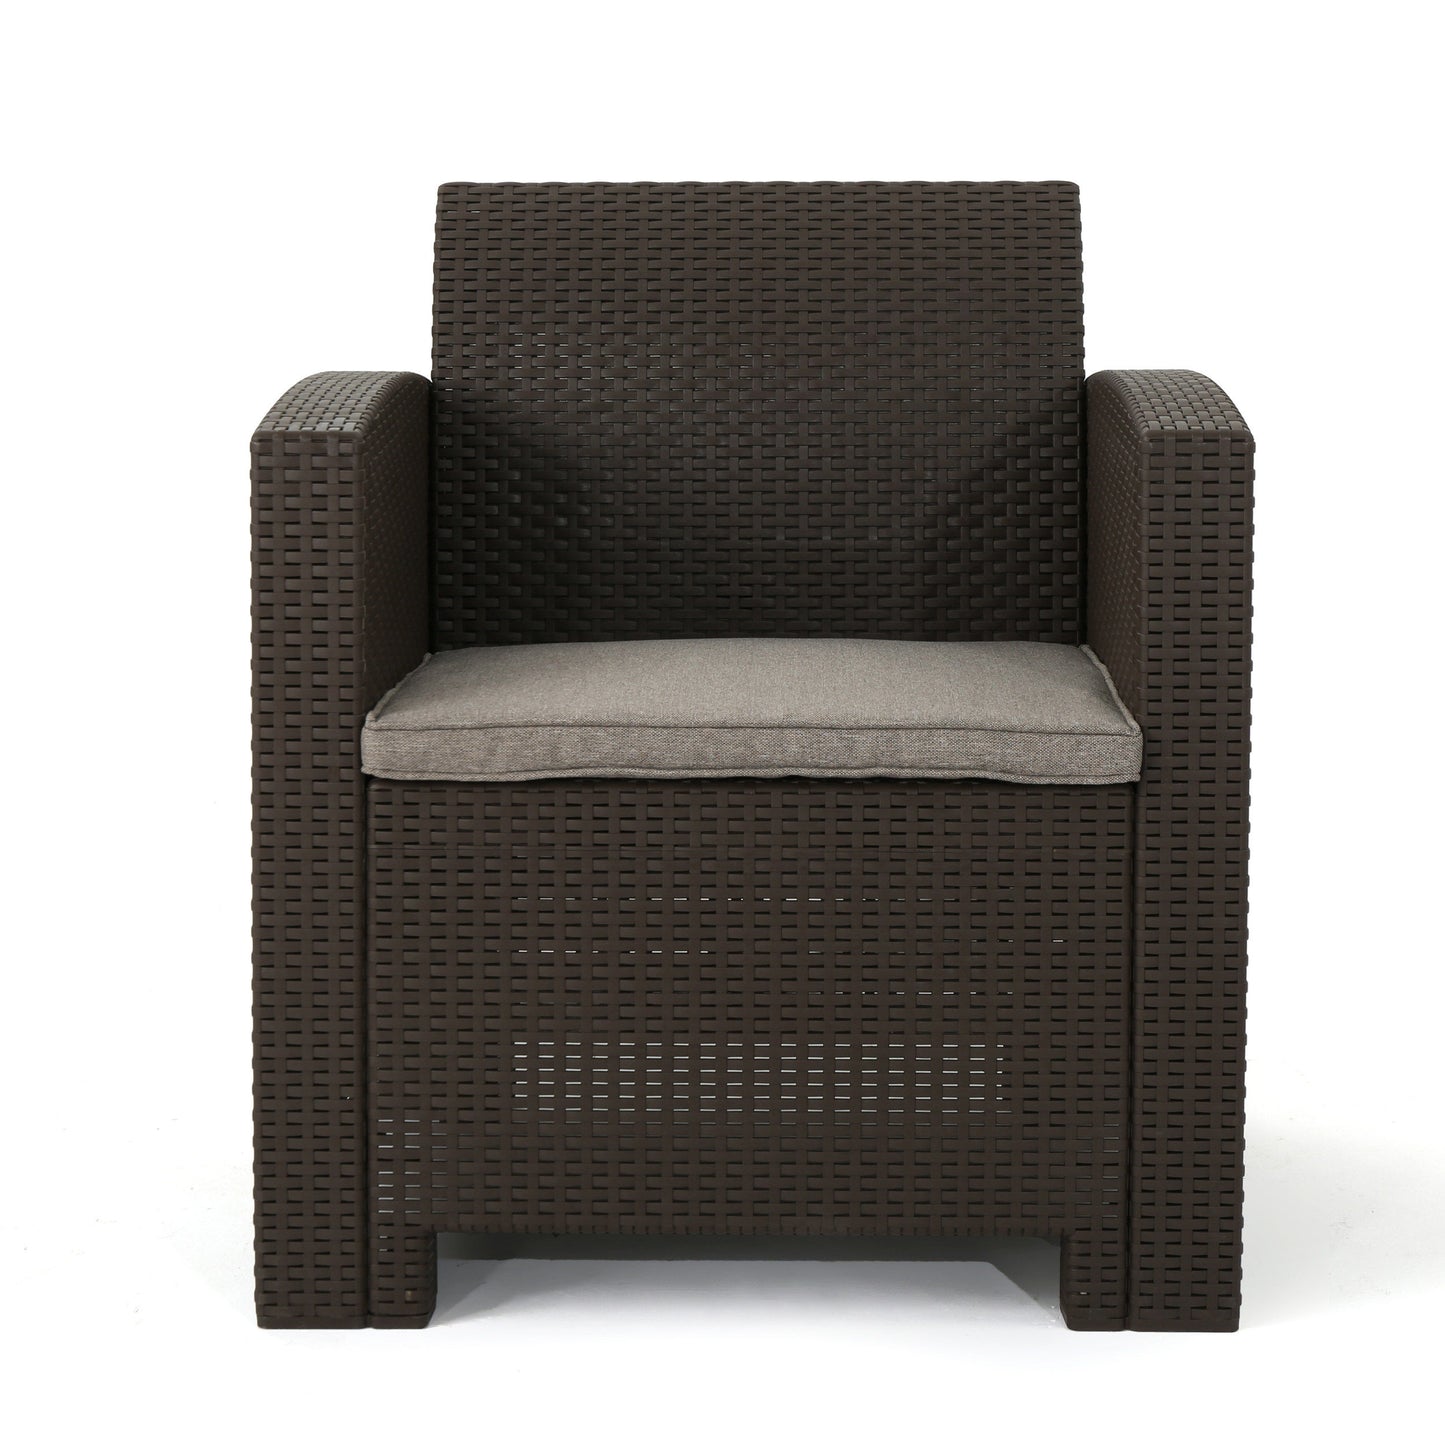 Ollie Outdoor 2-Seater Wicker Print Club Chair Chat Set with Fire Pit